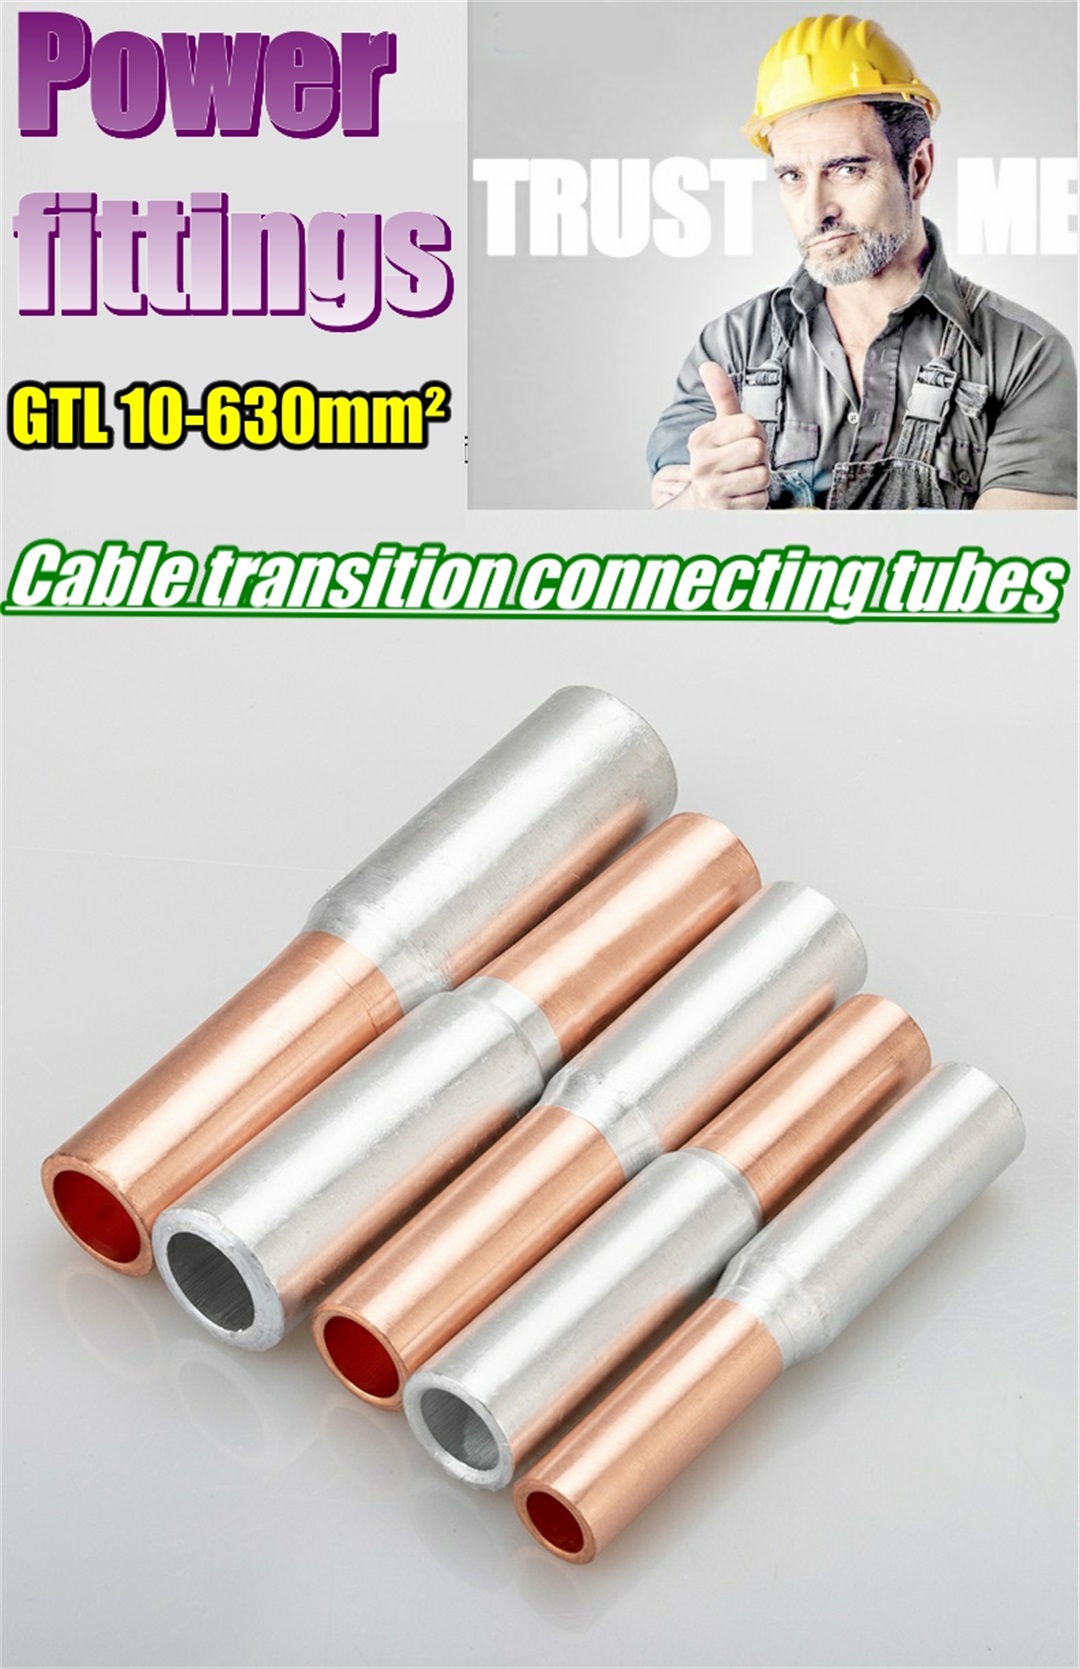 Copper aluminum connecting tubes cable lugs